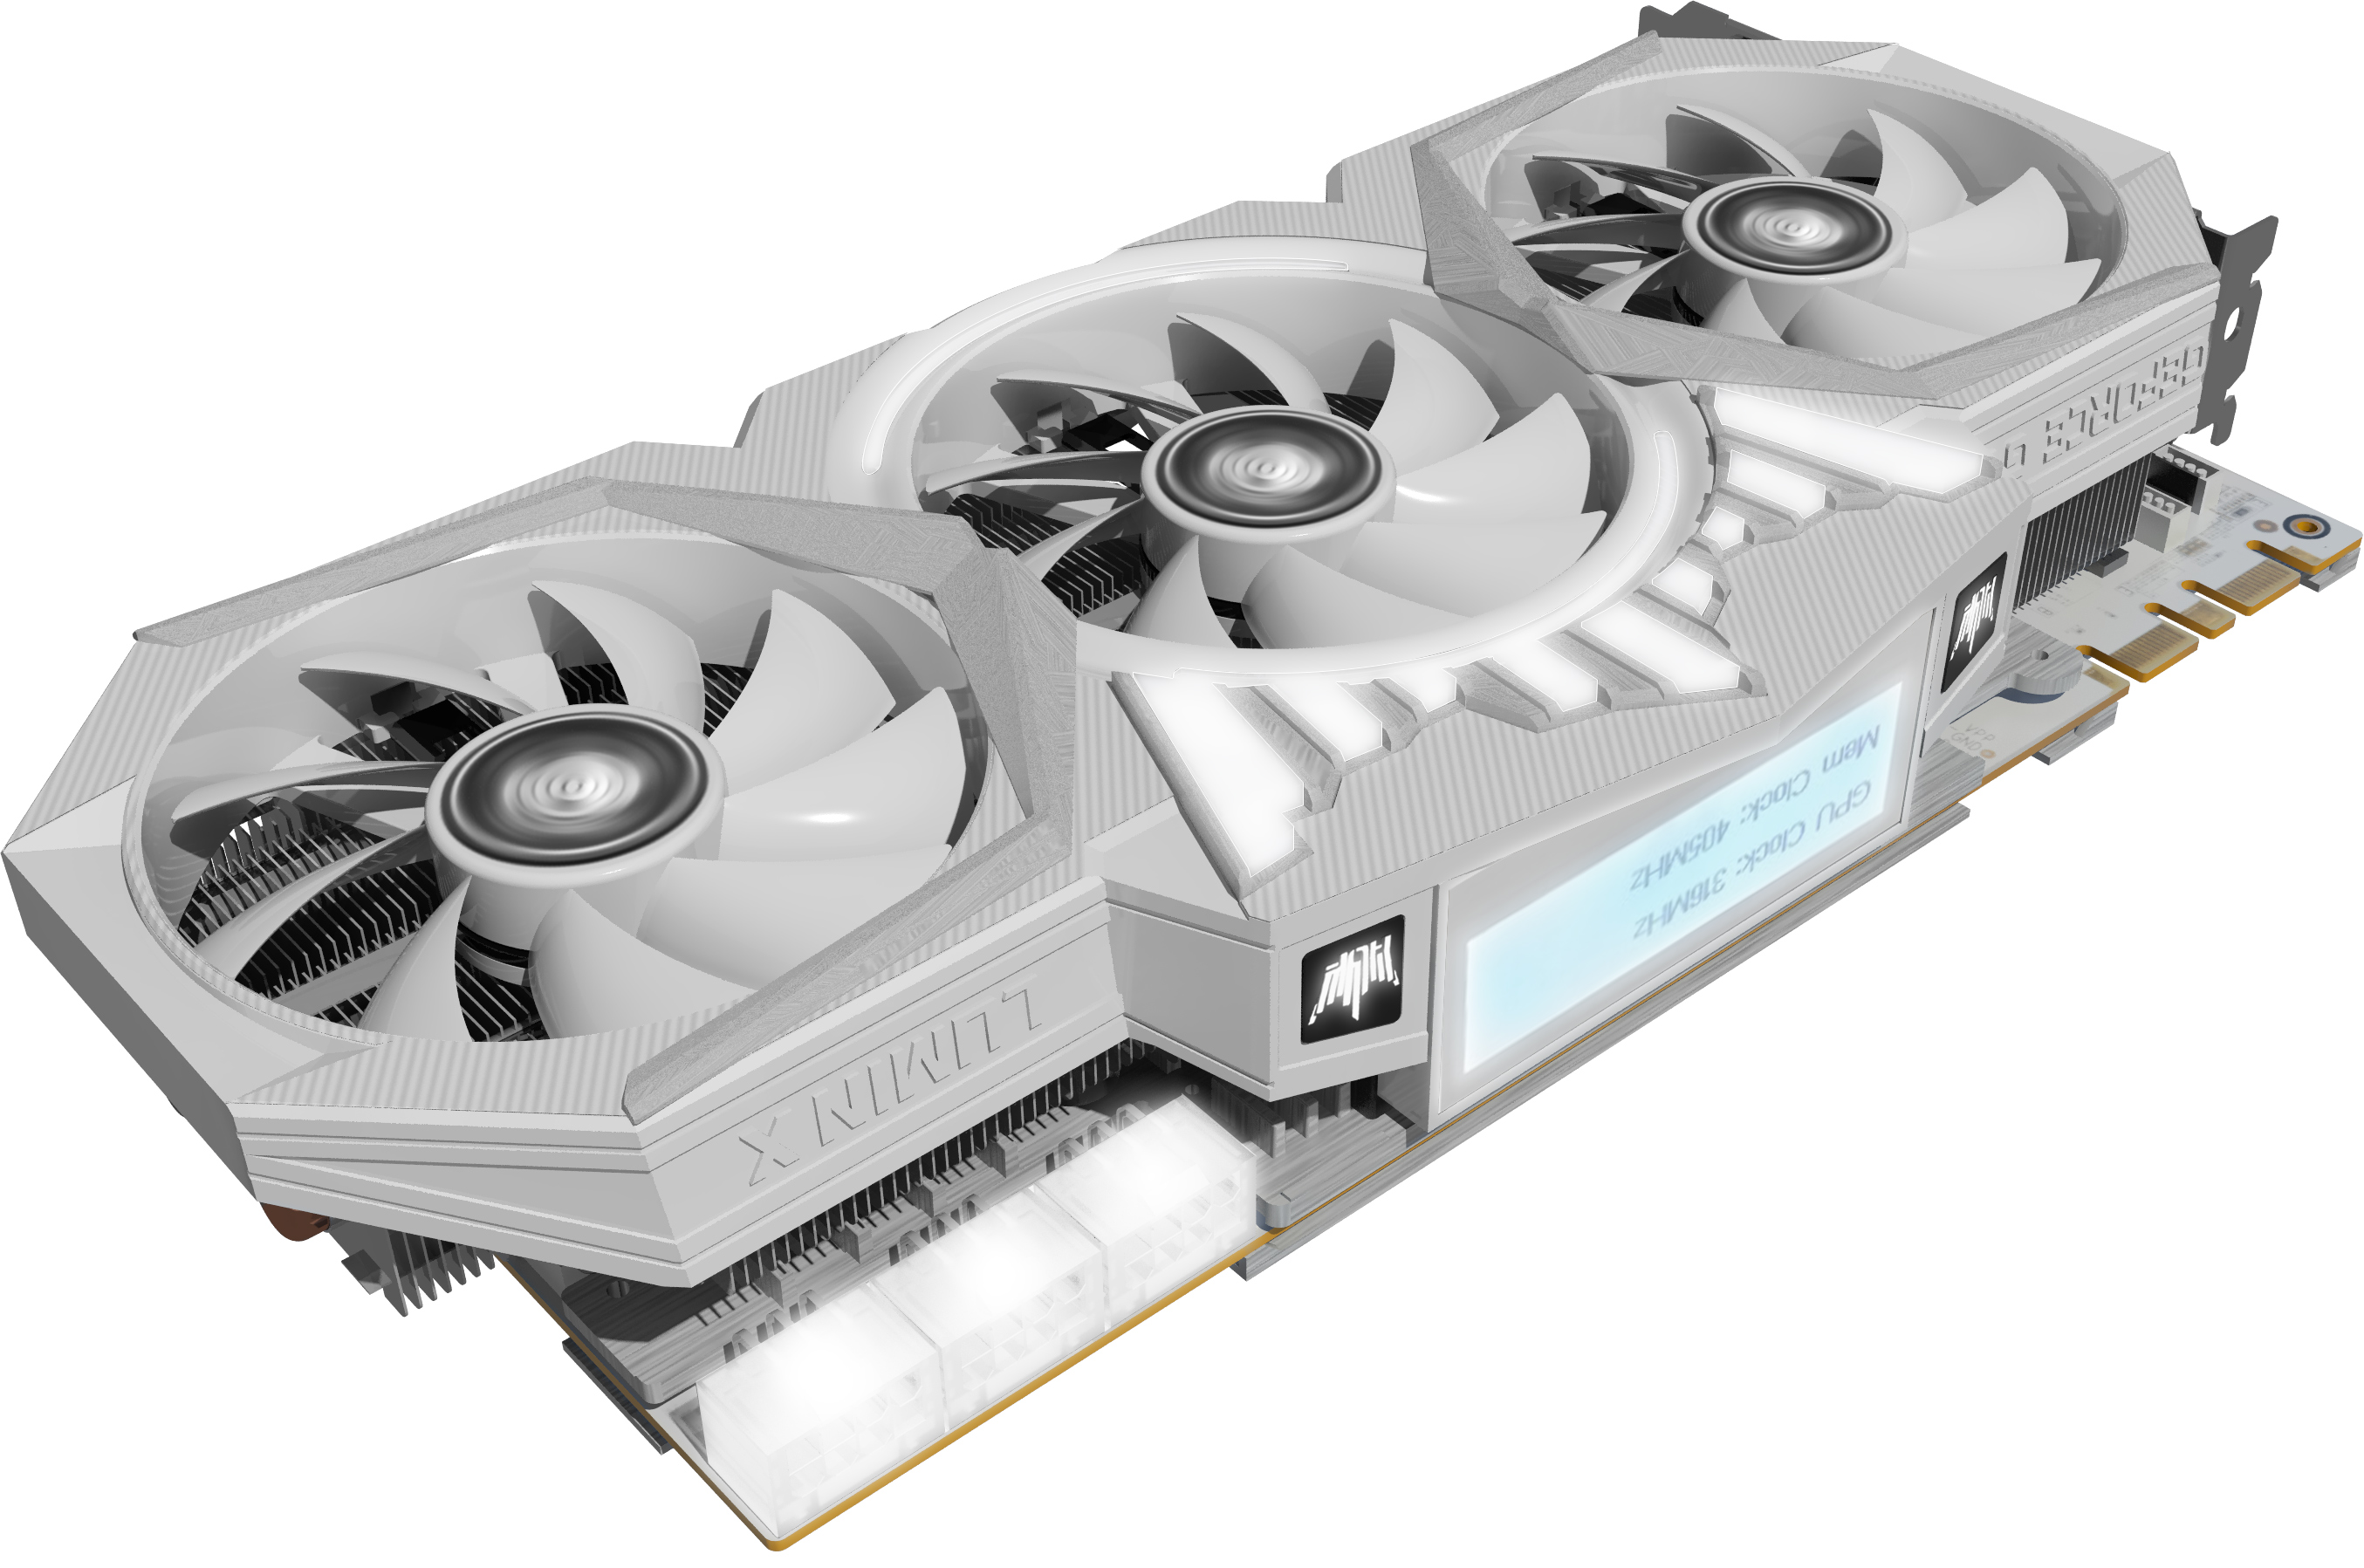 Palit GeForce GTX 1080 Ti HOF Limited Edition Announced: 1.75 GHz and